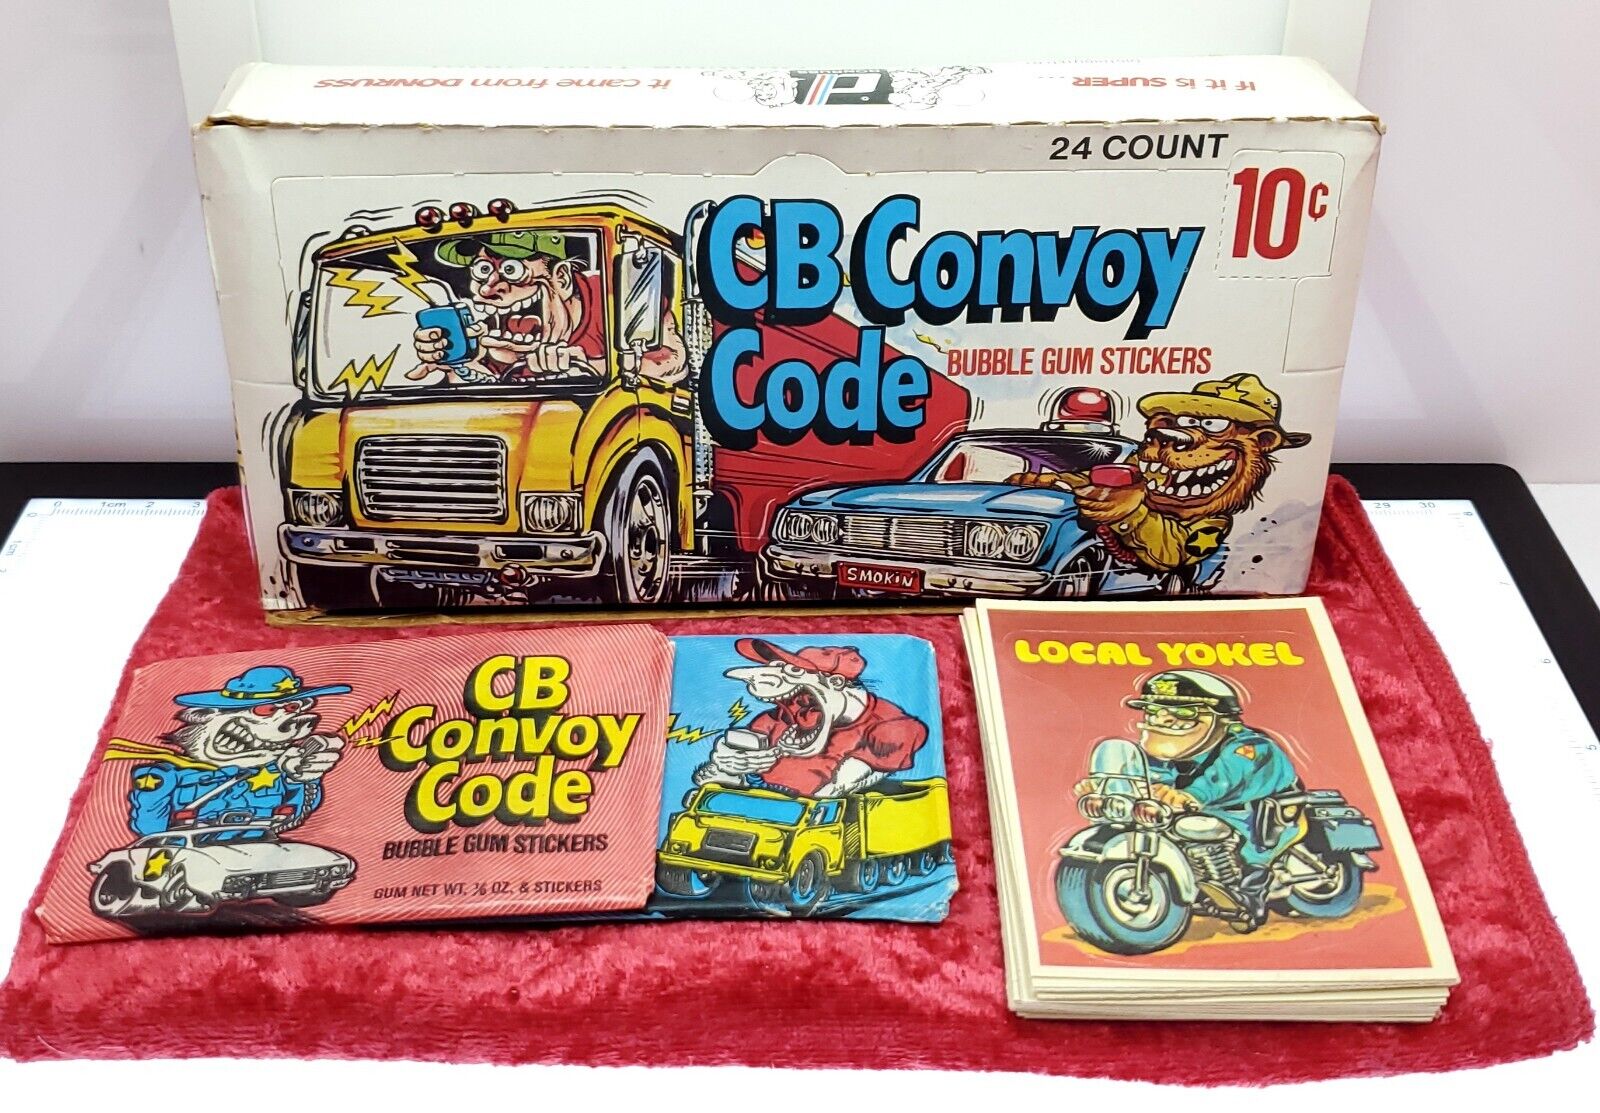 Vtg 1970s CB Convoy Code Bubble Gum Stickers Card Lot with Box Wrappers